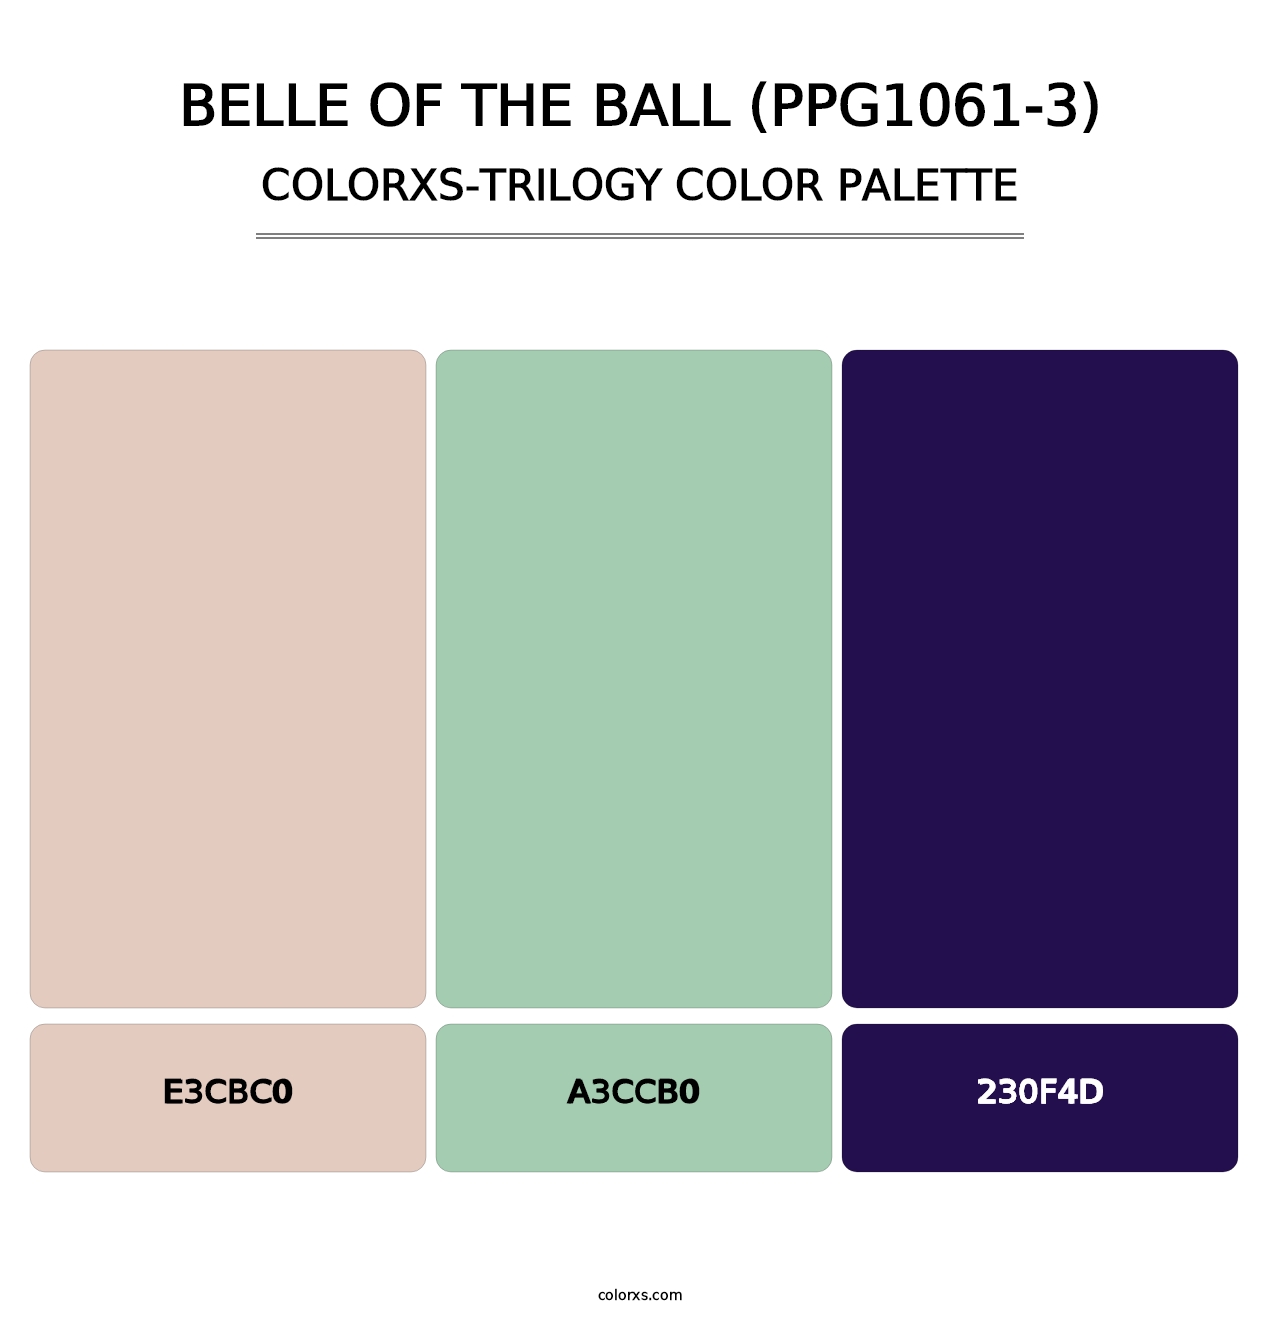 Belle Of The Ball (PPG1061-3) - Colorxs Trilogy Palette